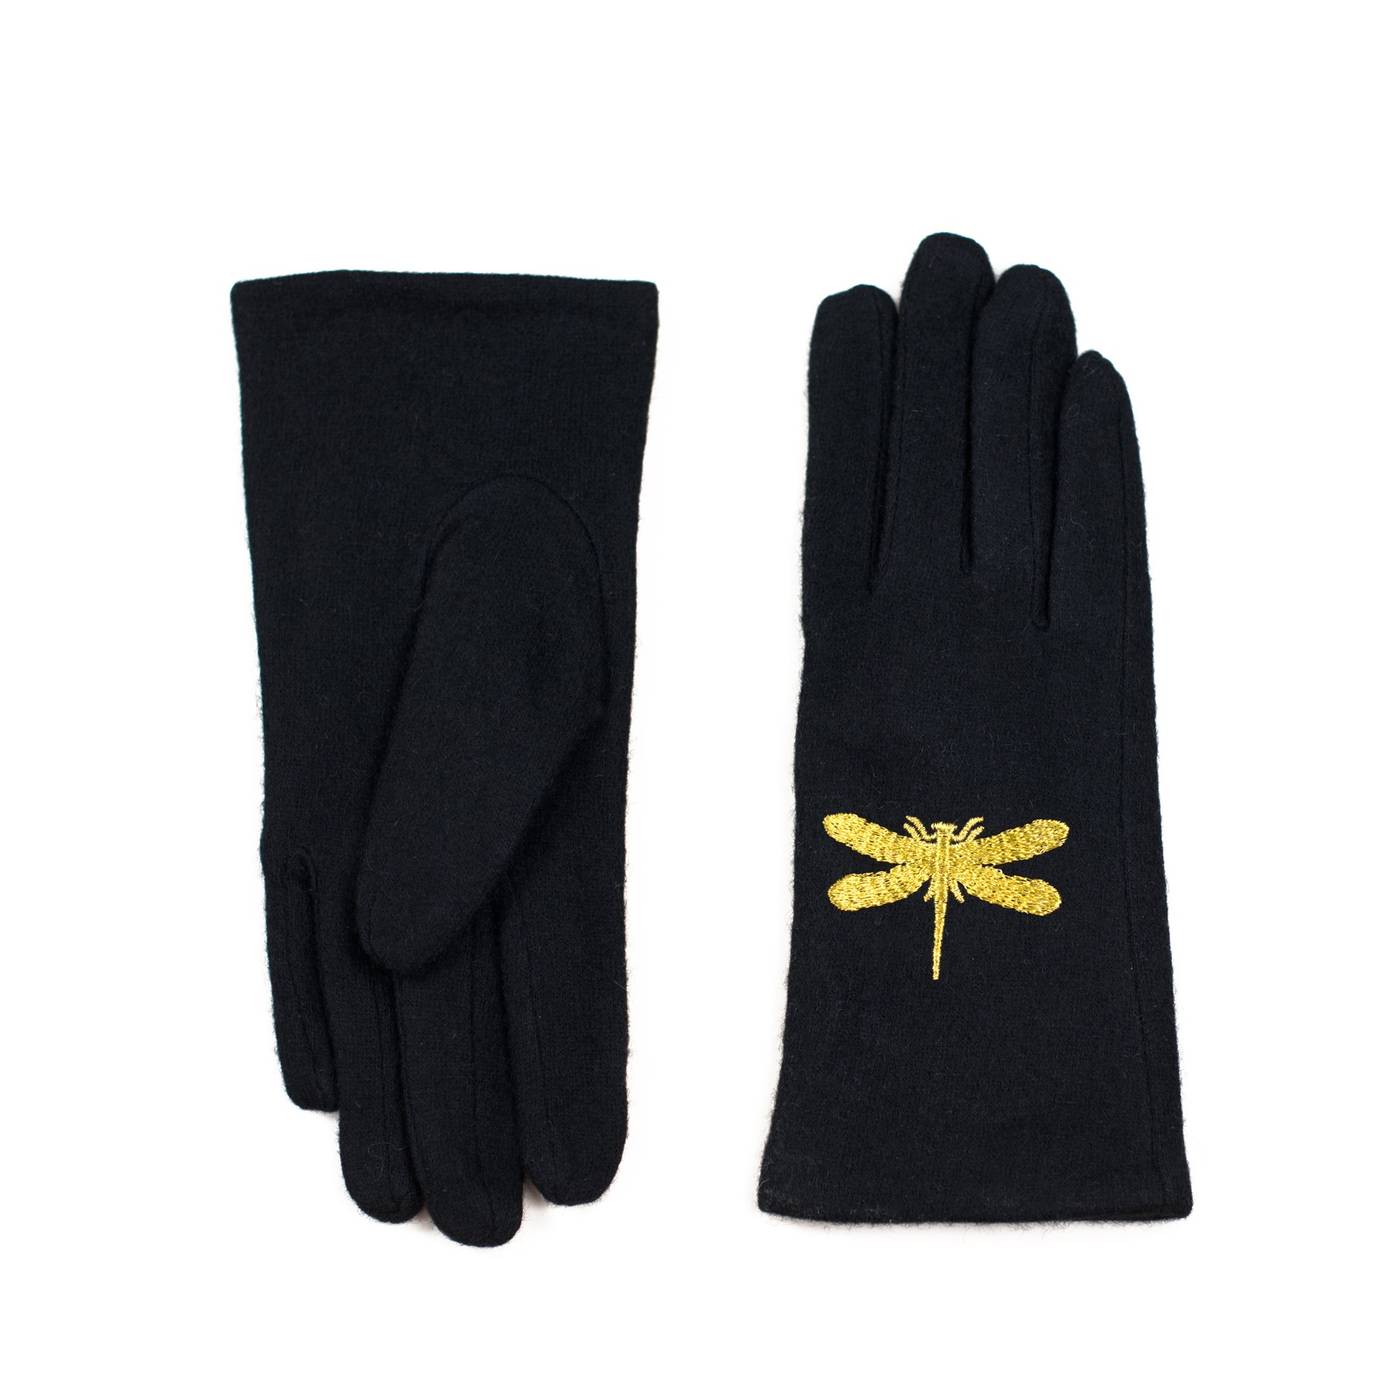 Art Of Polo Woman's Gloves rk18359